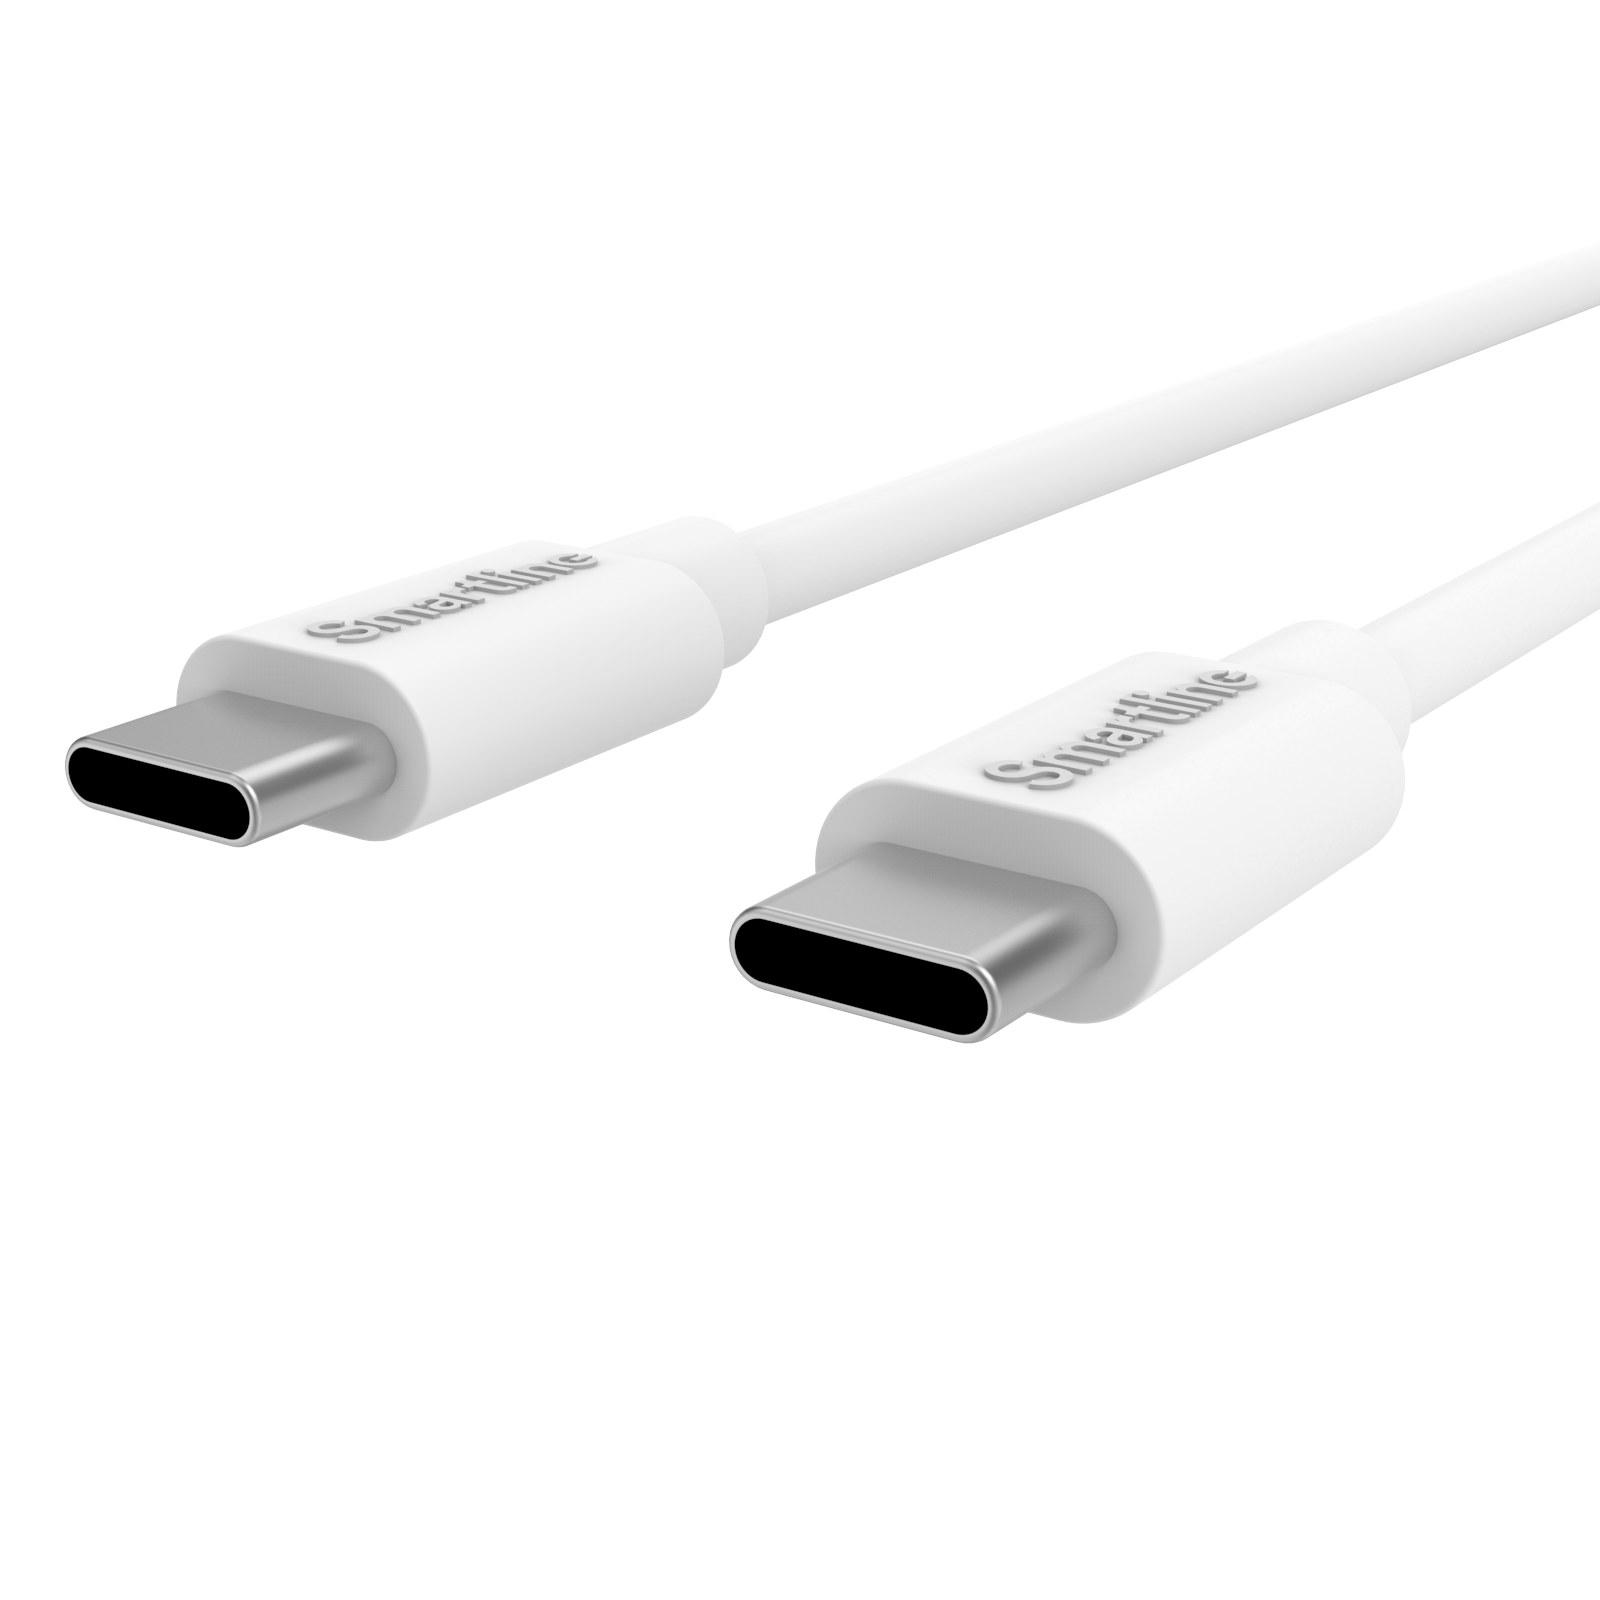 Complete Charger Google Pixel 9 Pro XL - 2 meter Cable and Wall Charger USB-C - Smartline